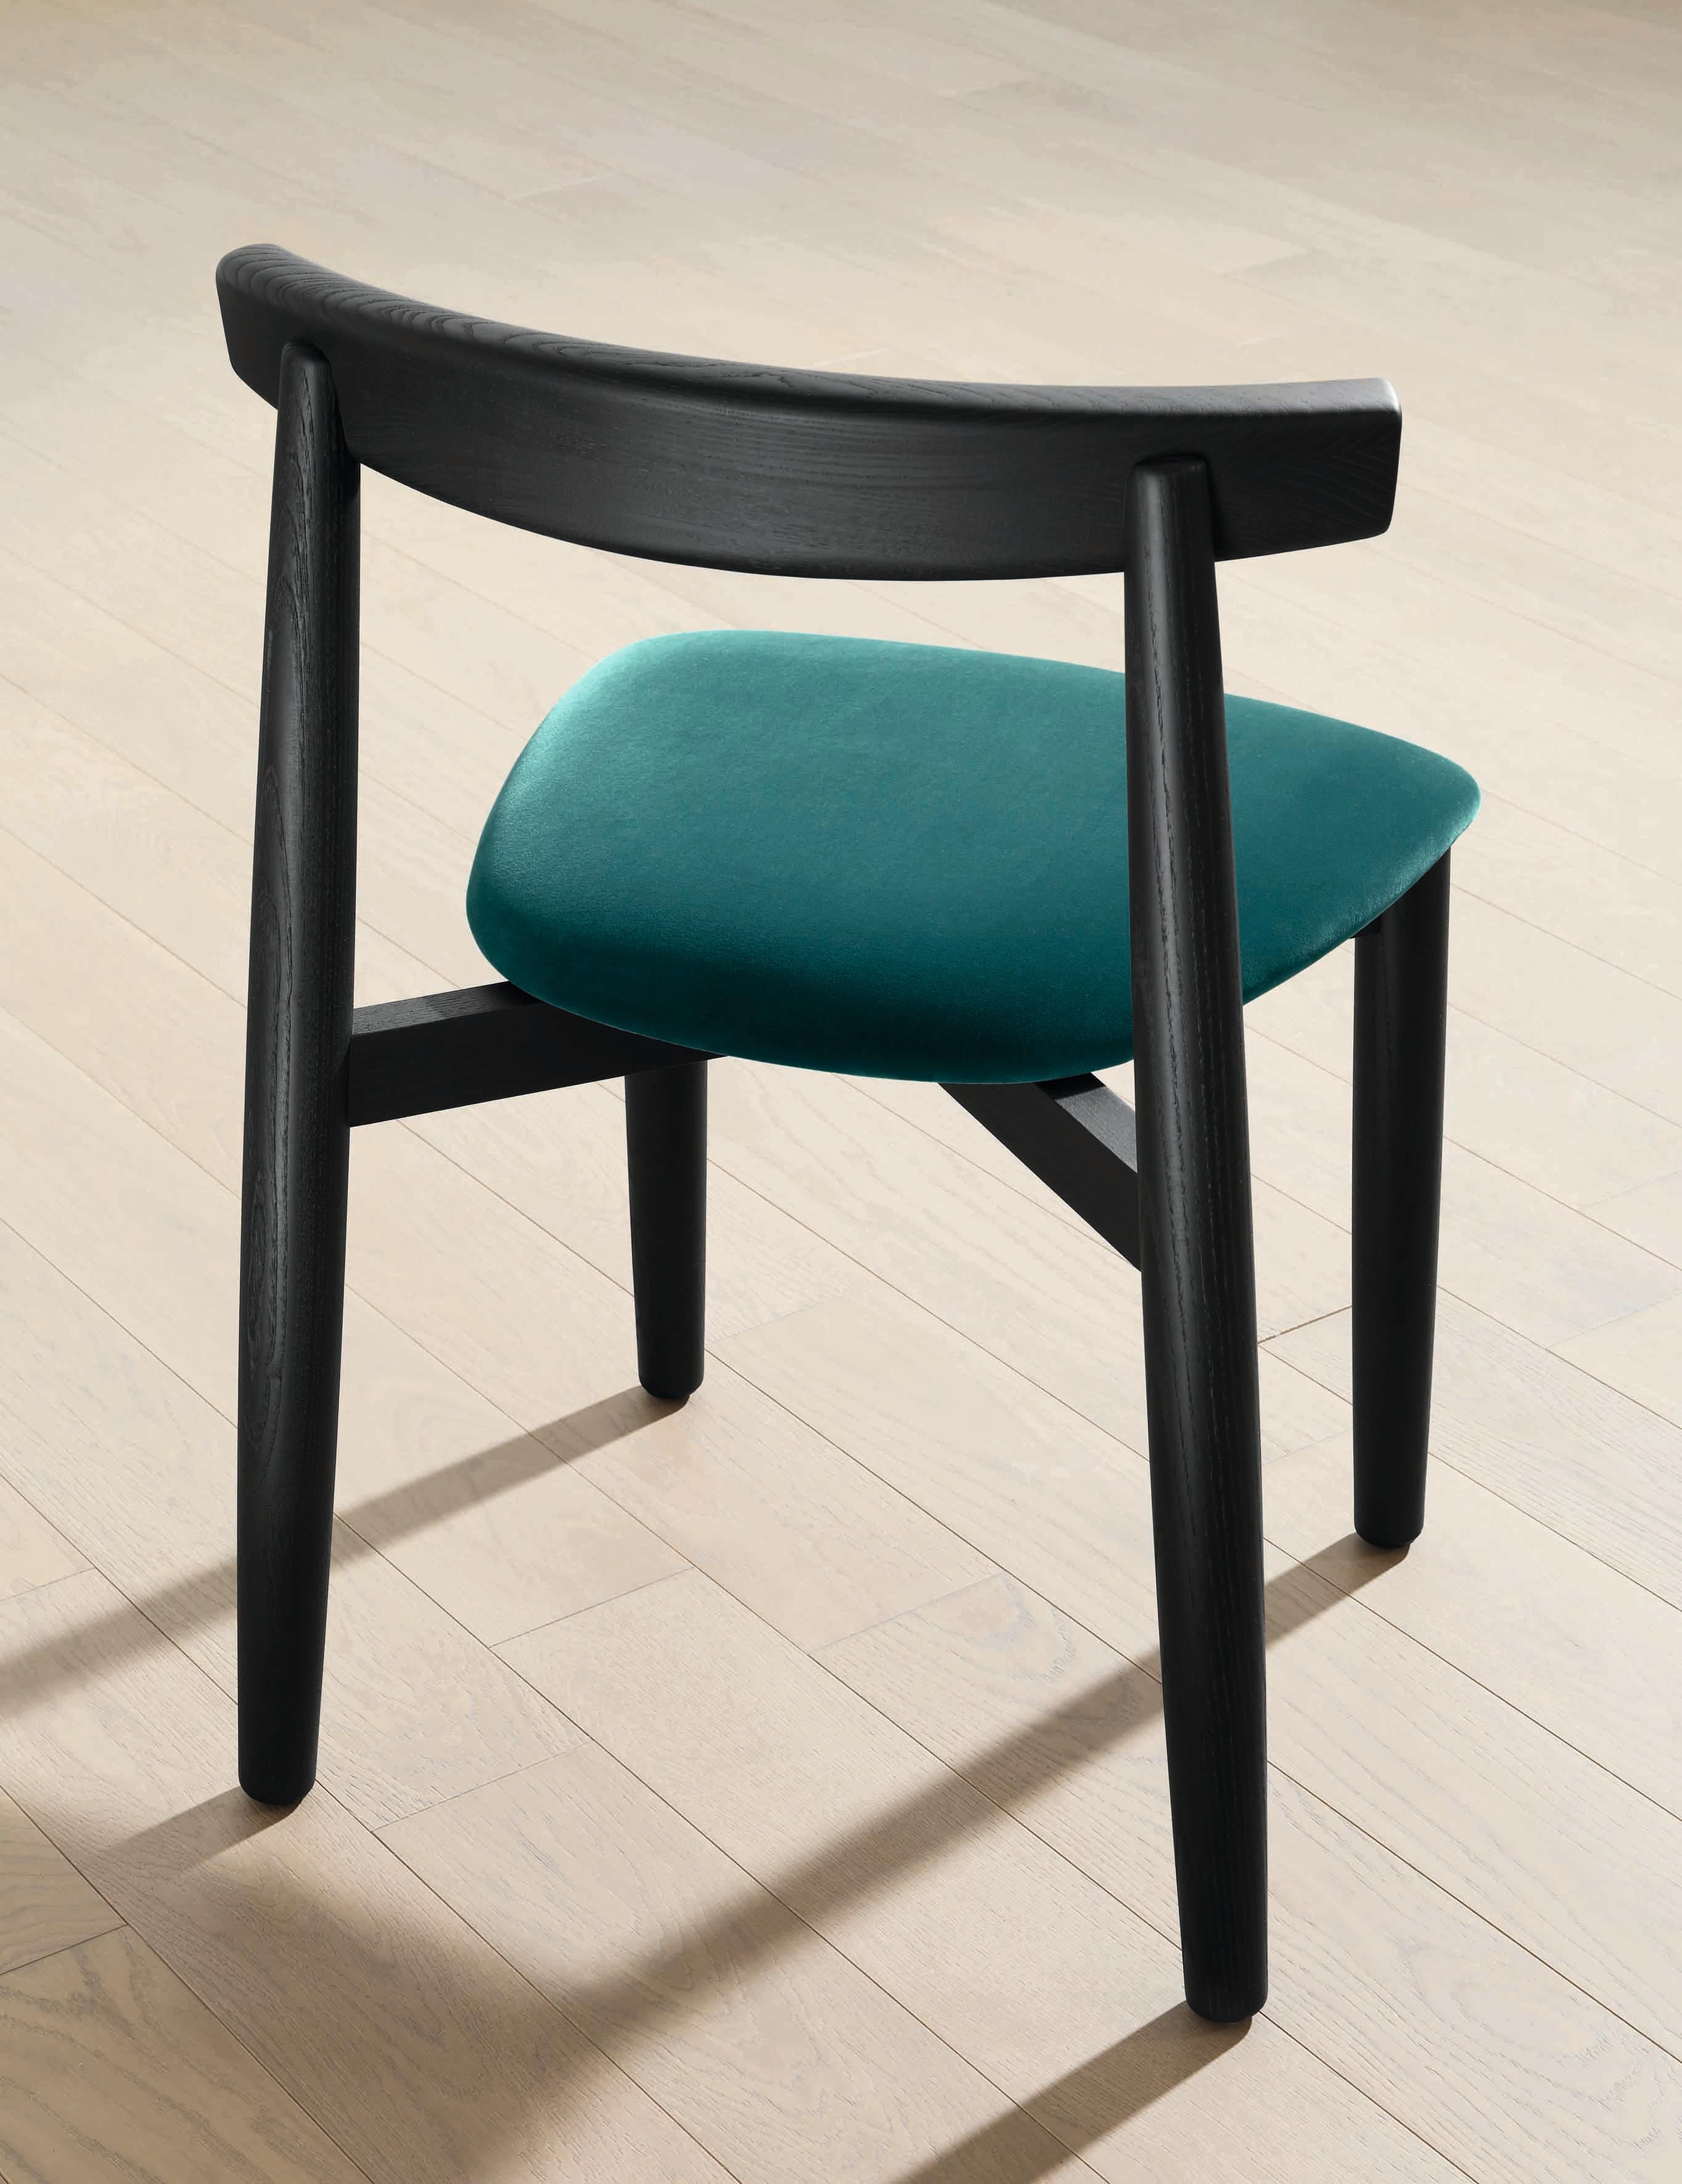 Modern Claretta Bold Chair in Matching Aniline Base, Upholstery Seat, by Florian Schmid For Sale